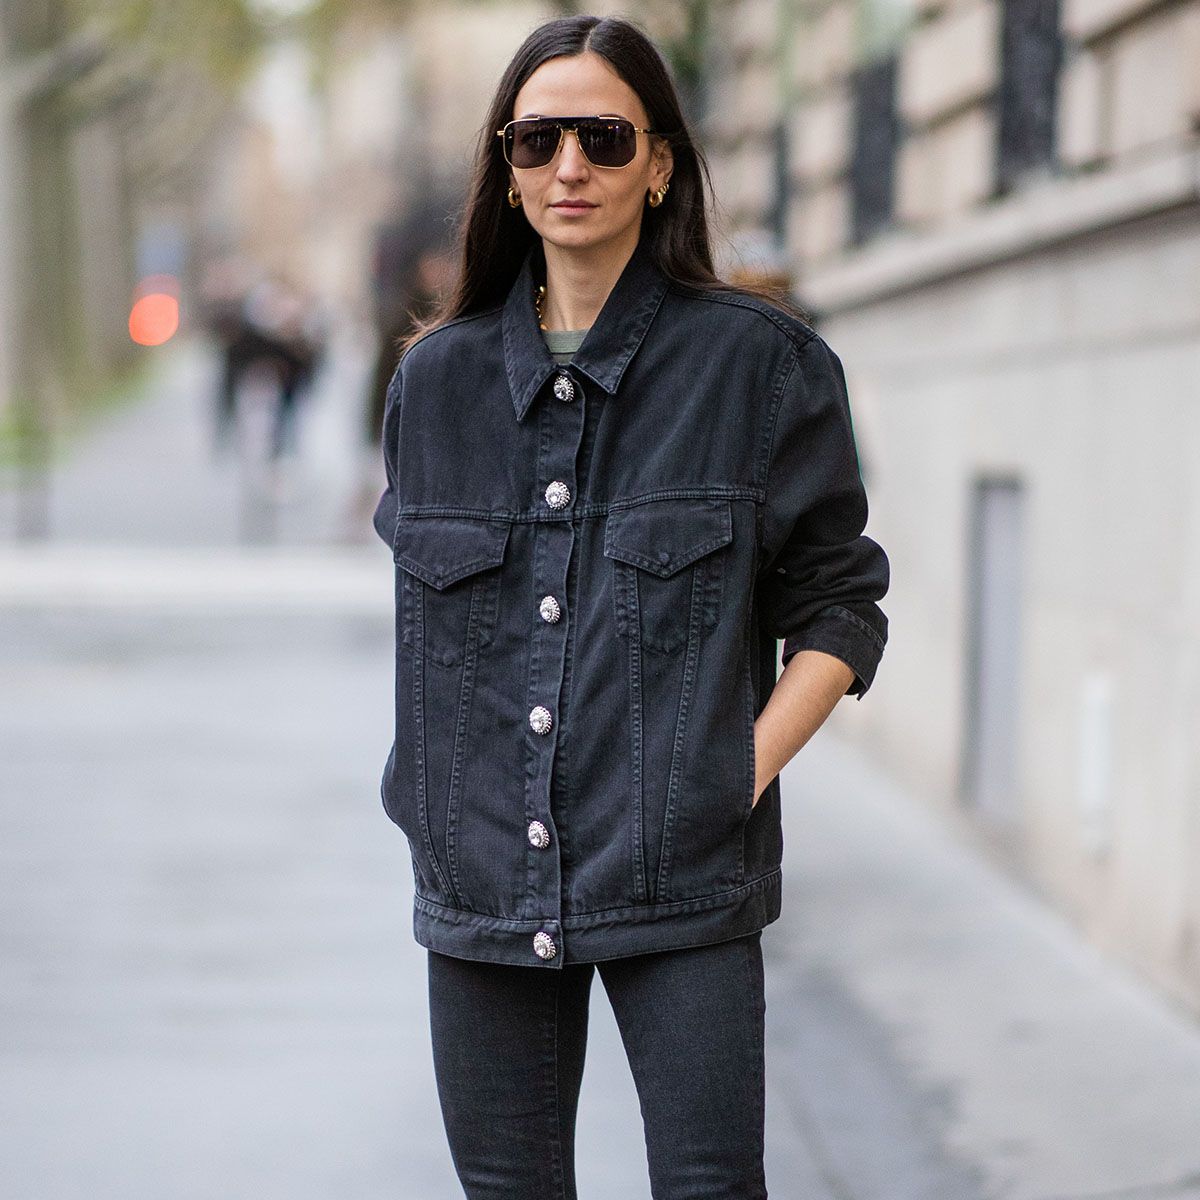 black denim jacket outfits for fall 270061 1598327713955 square 1200 80